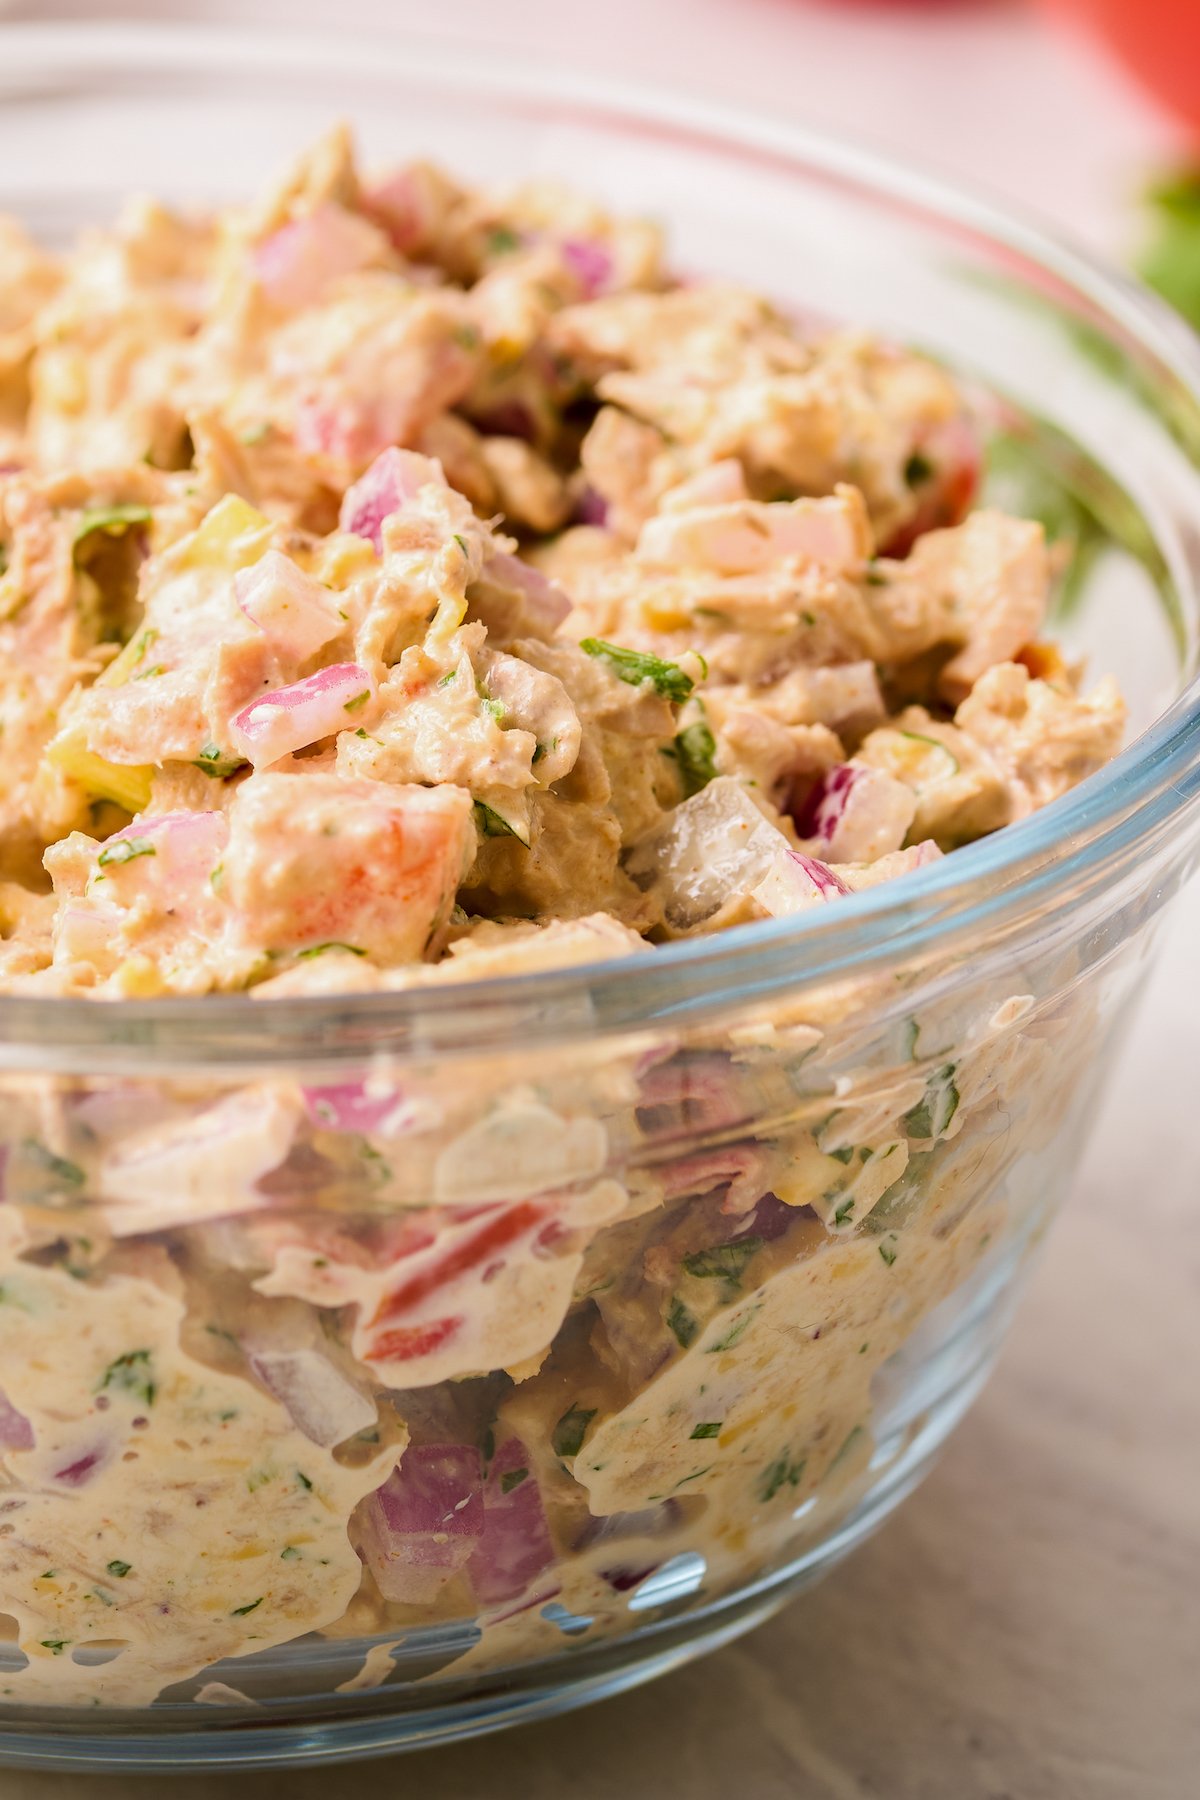 A side view of tuna salad in a large glass bowl.